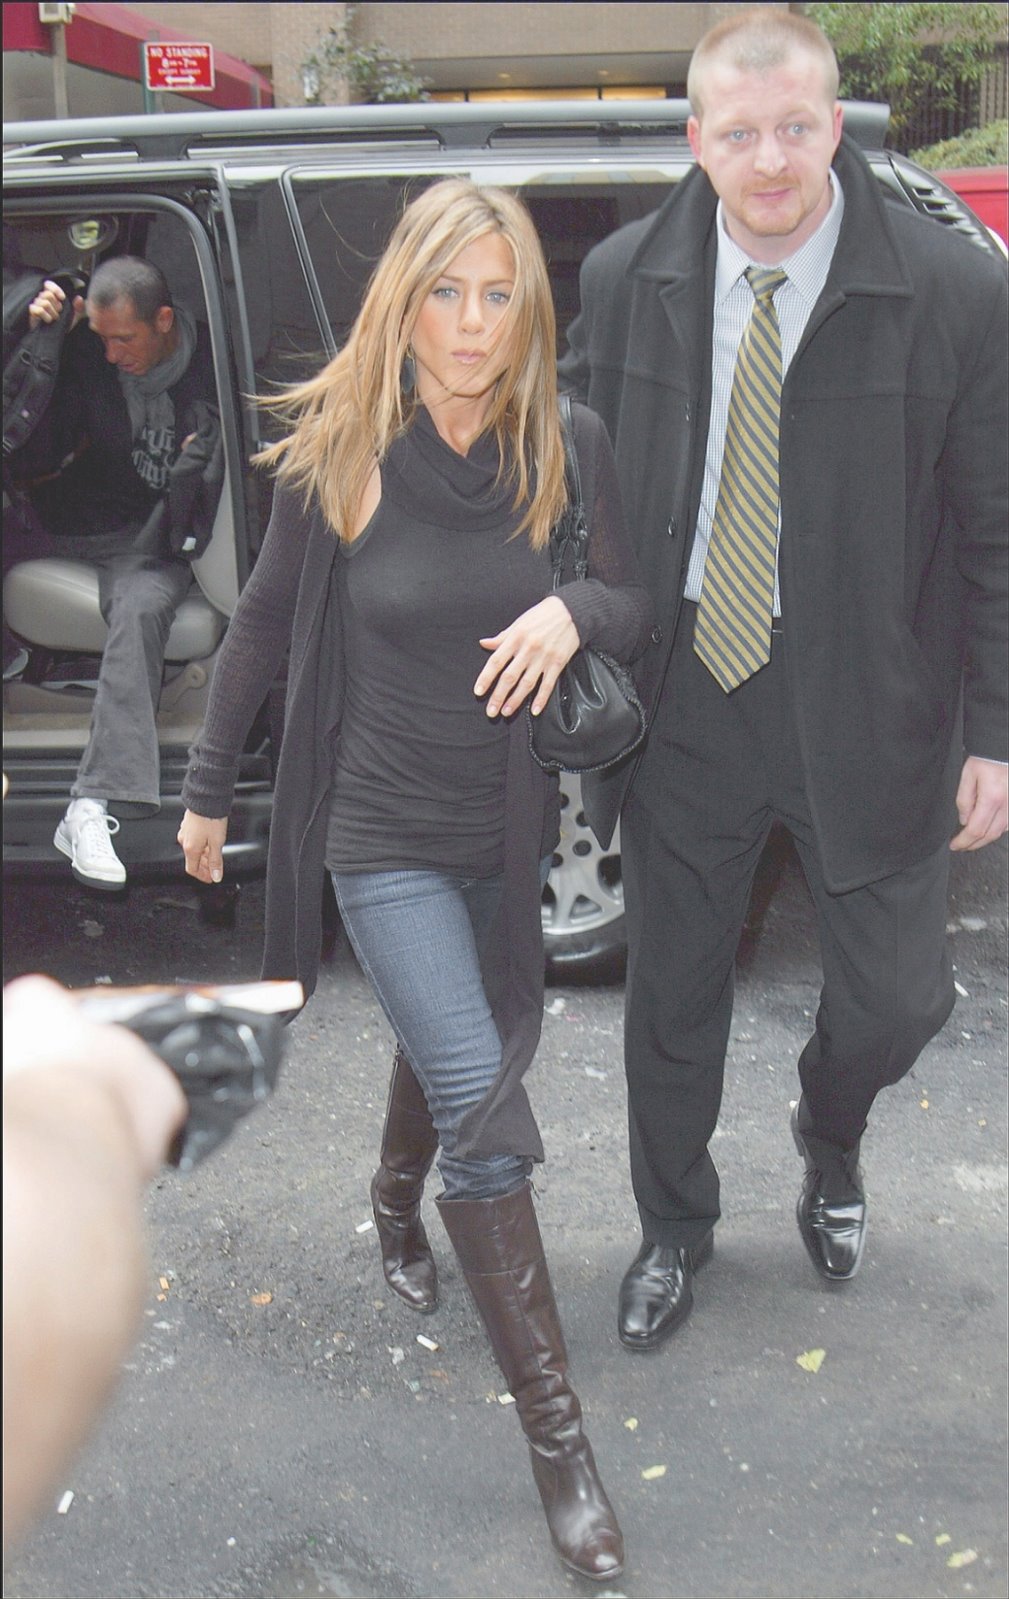 [Jennifer+Aniston+brown+boots+and+jeans+inside.jpeg]